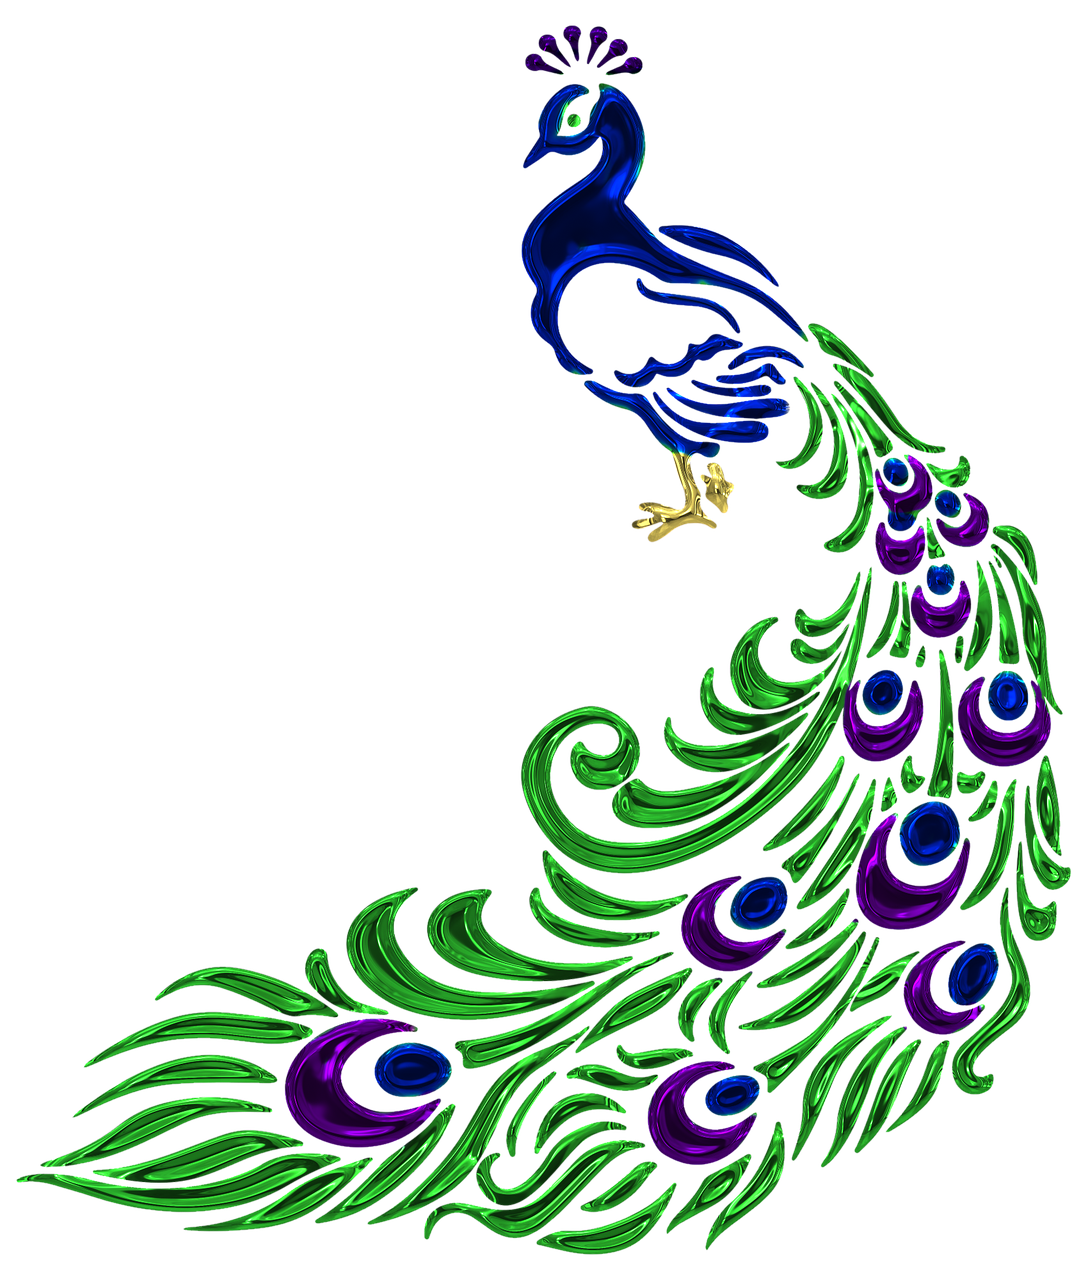 a close up of a peacock on a black background, a digital rendering, inspired by Master of the Embroidered Foliage, arabesque, simple path traced, purple and green colors, front side view full sheet, shoulder patch design